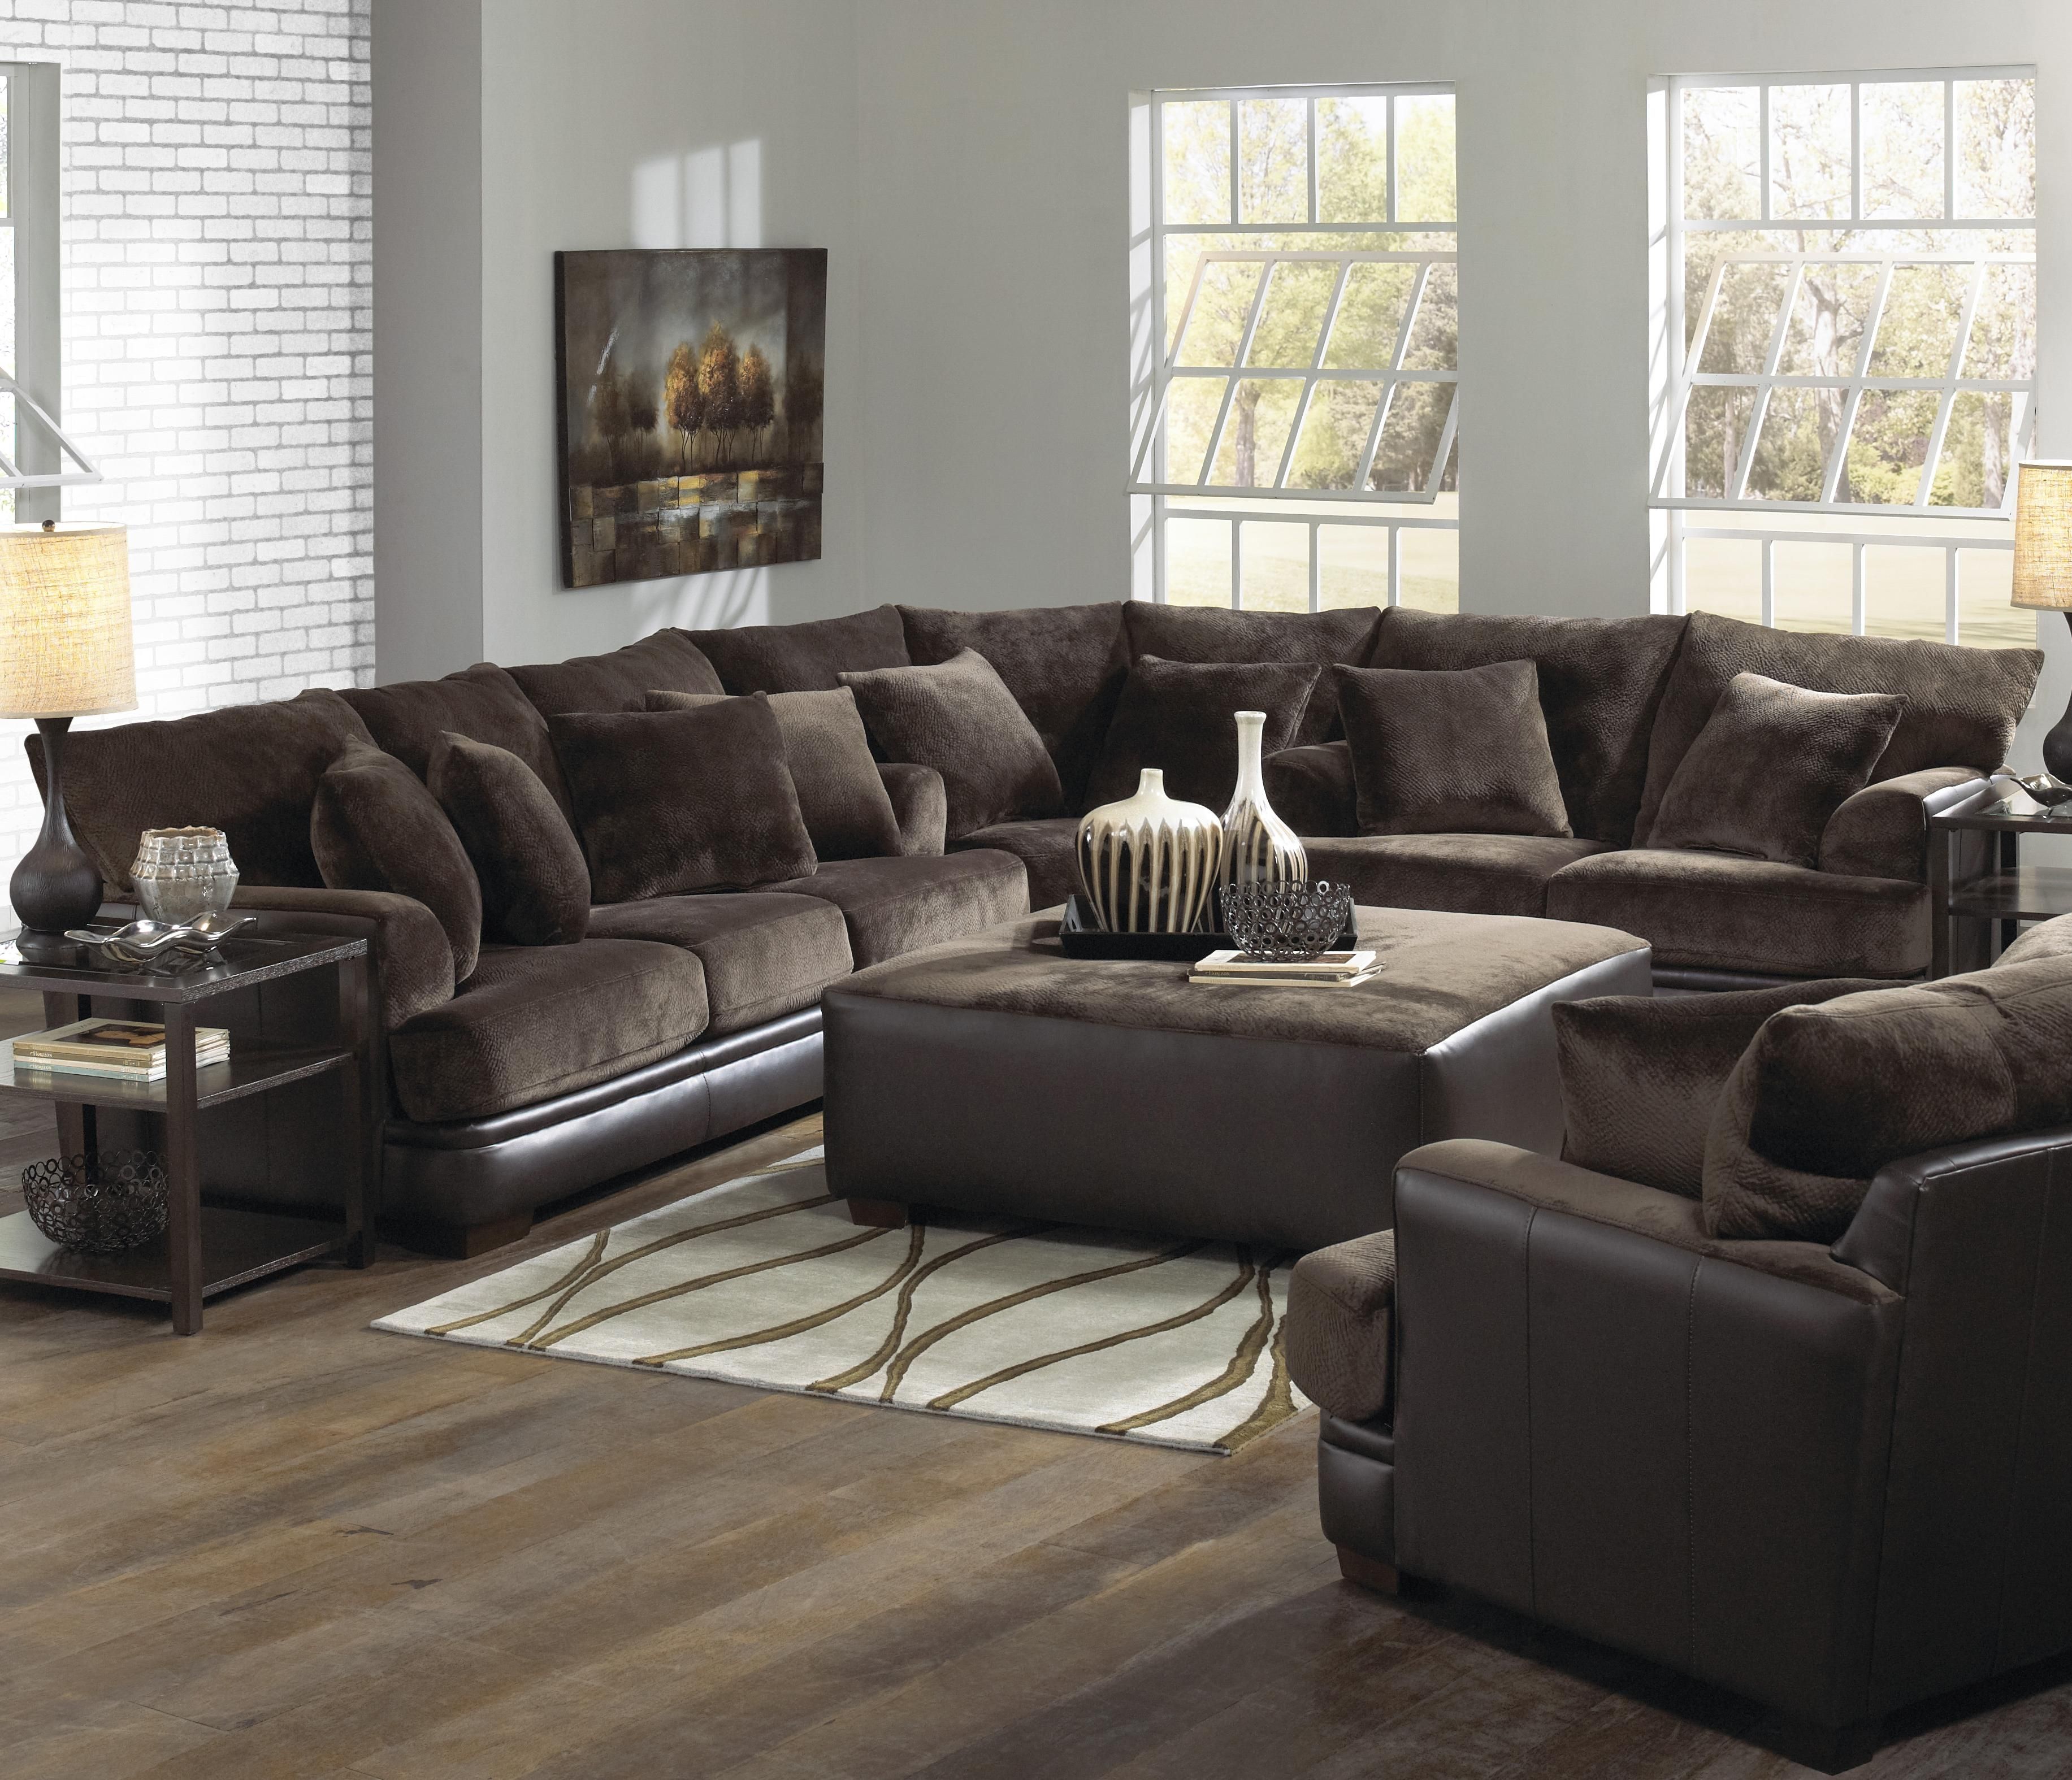 Sofas Center High Quality Sectional Sofas Cleanupflorida Com In Abbyson Living Charlotte Beige Sectional Sofa And Ottoman (Photo 9 of 15)